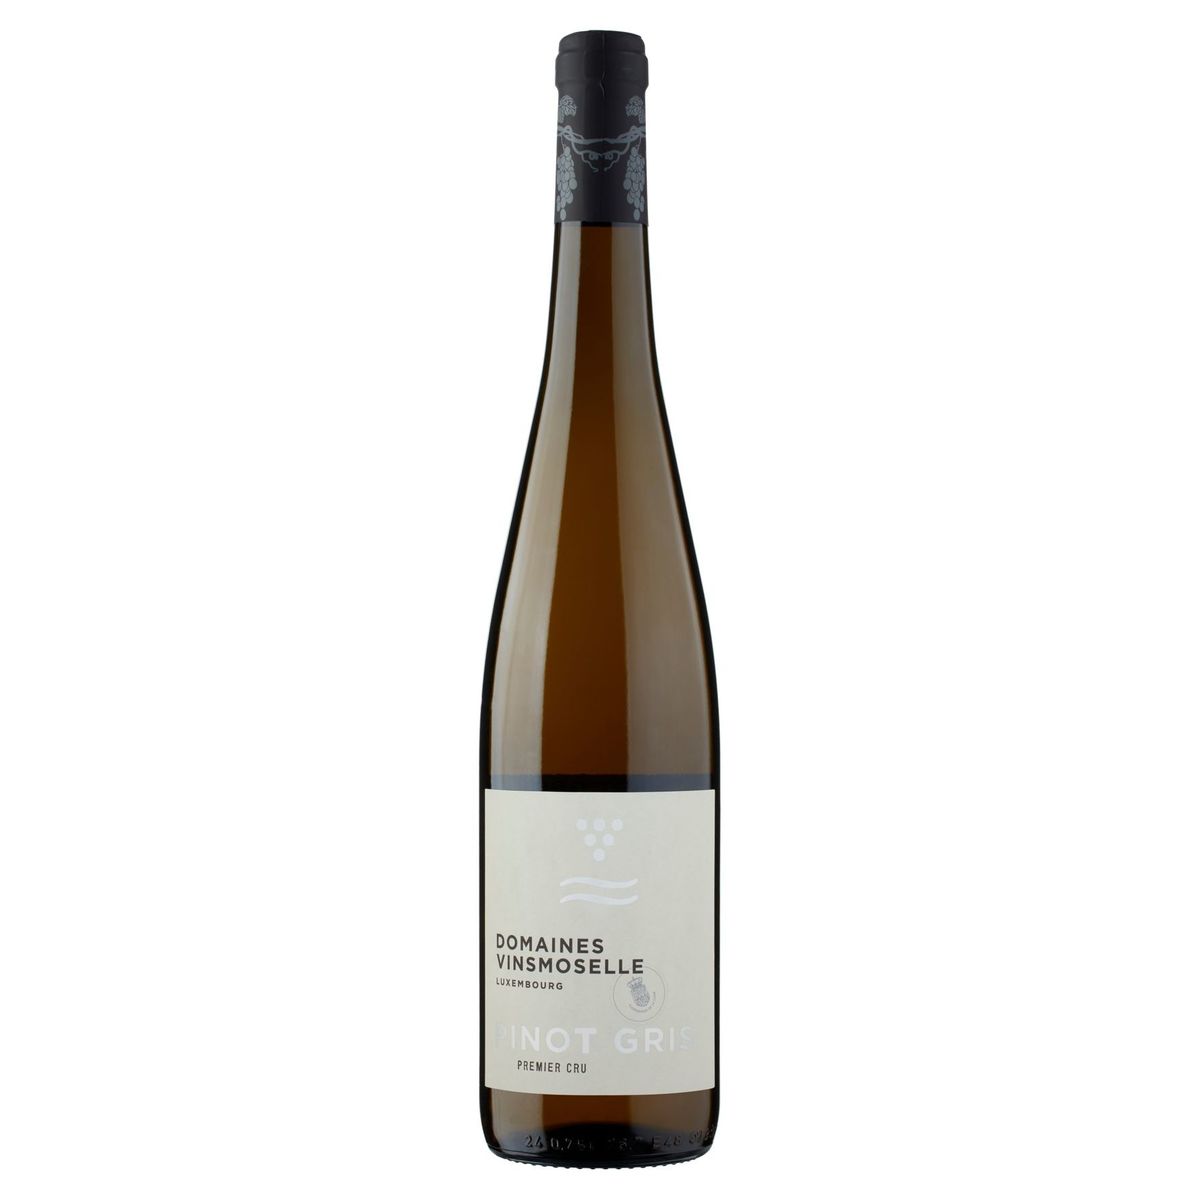 Domaines Vinsmoselle Pinot Gris 75 cl